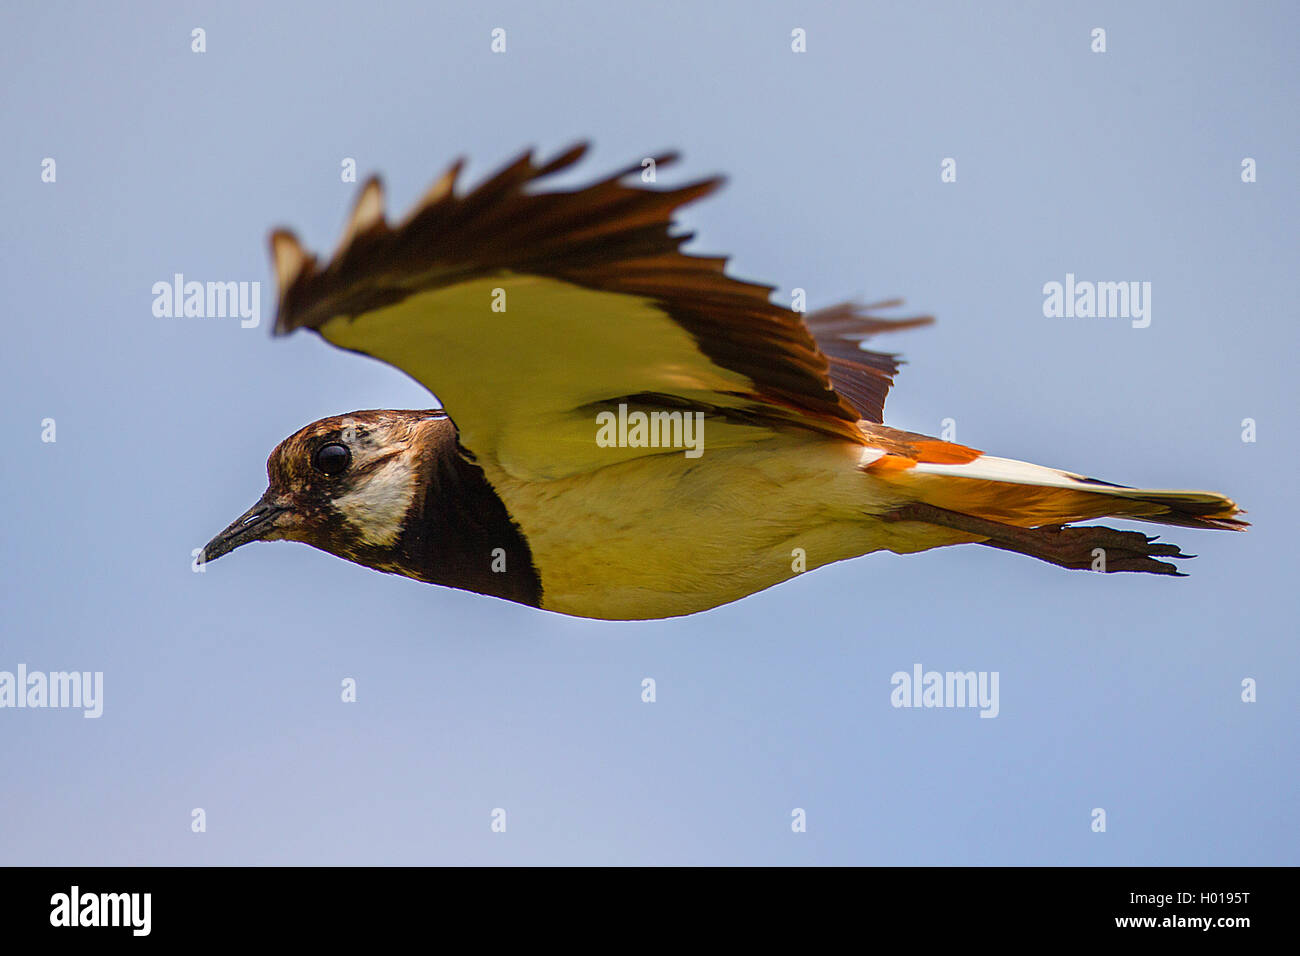 southern lapwing (Vanellus chilensis), flying, Romania, Danube Delta Stock Photo